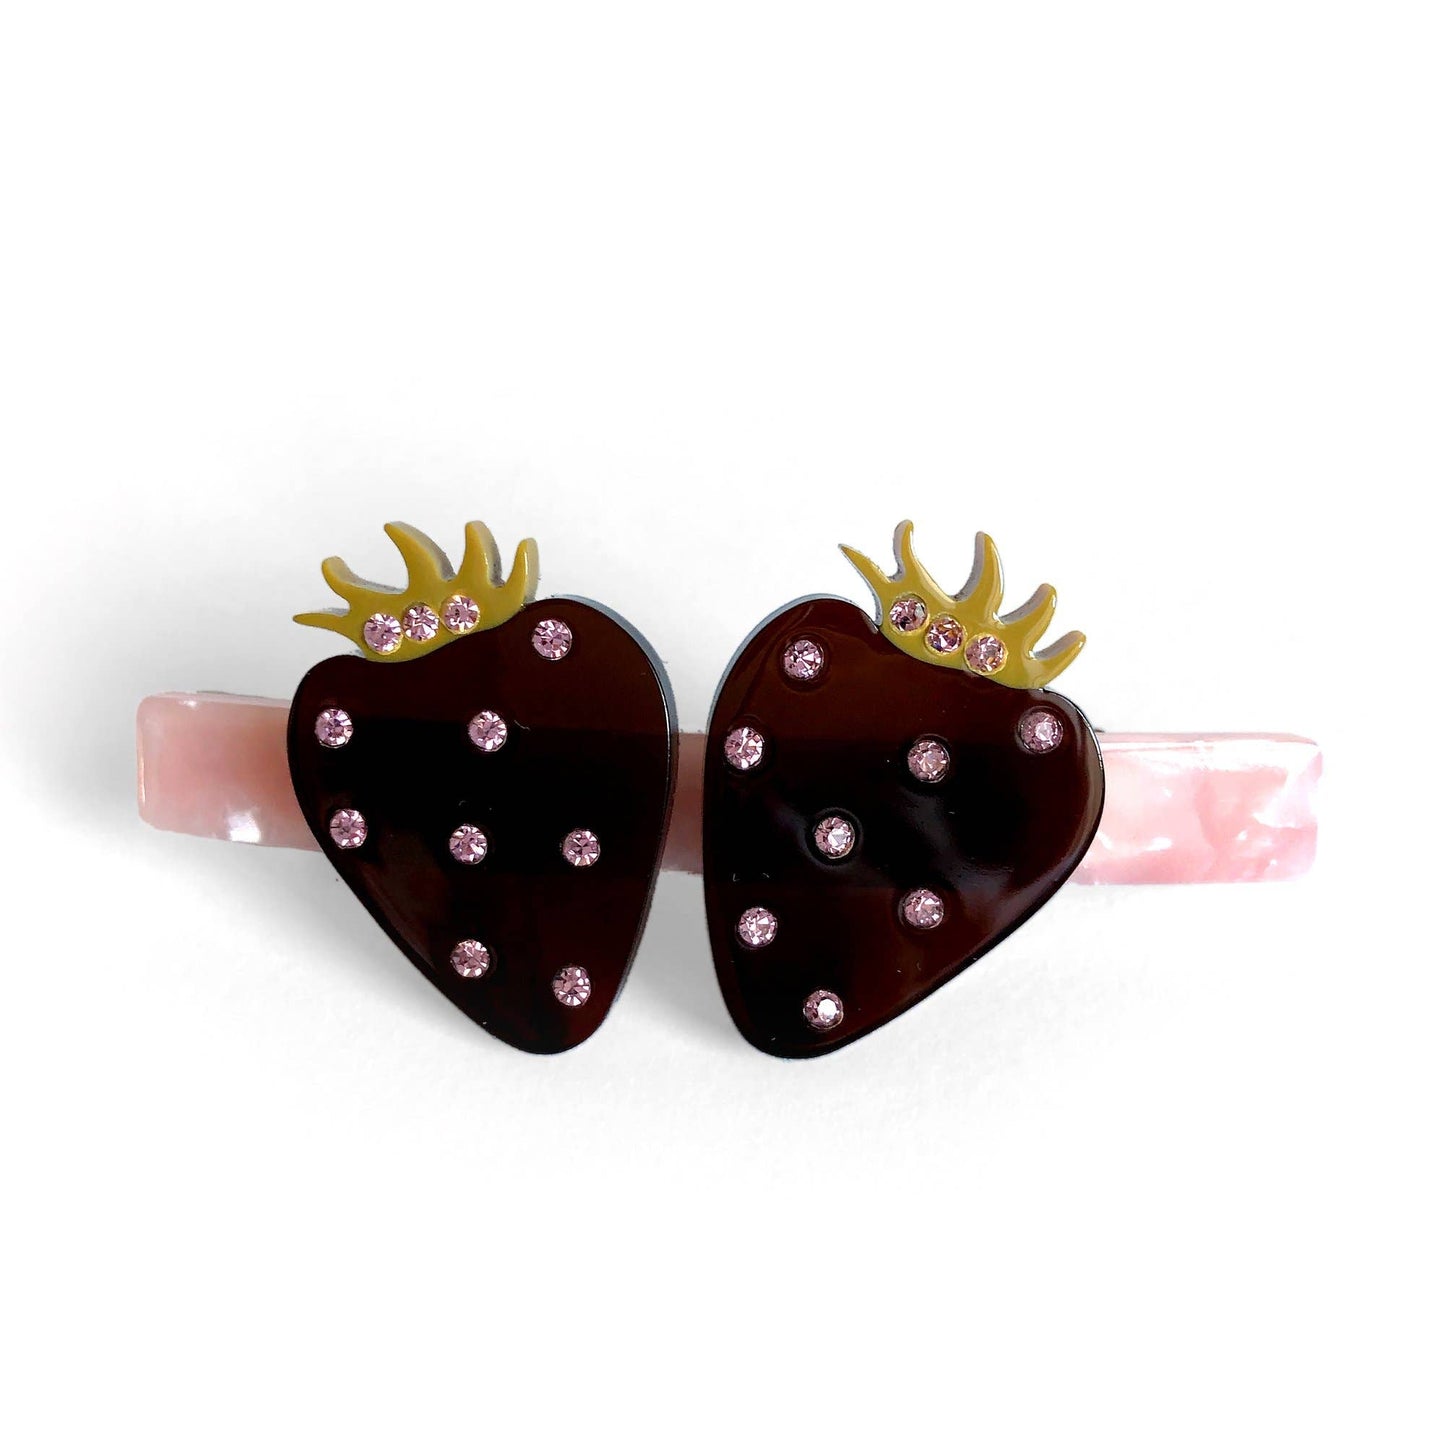 Hair barrette -- two black, translucent strawberries on a pearlescent pink post. 